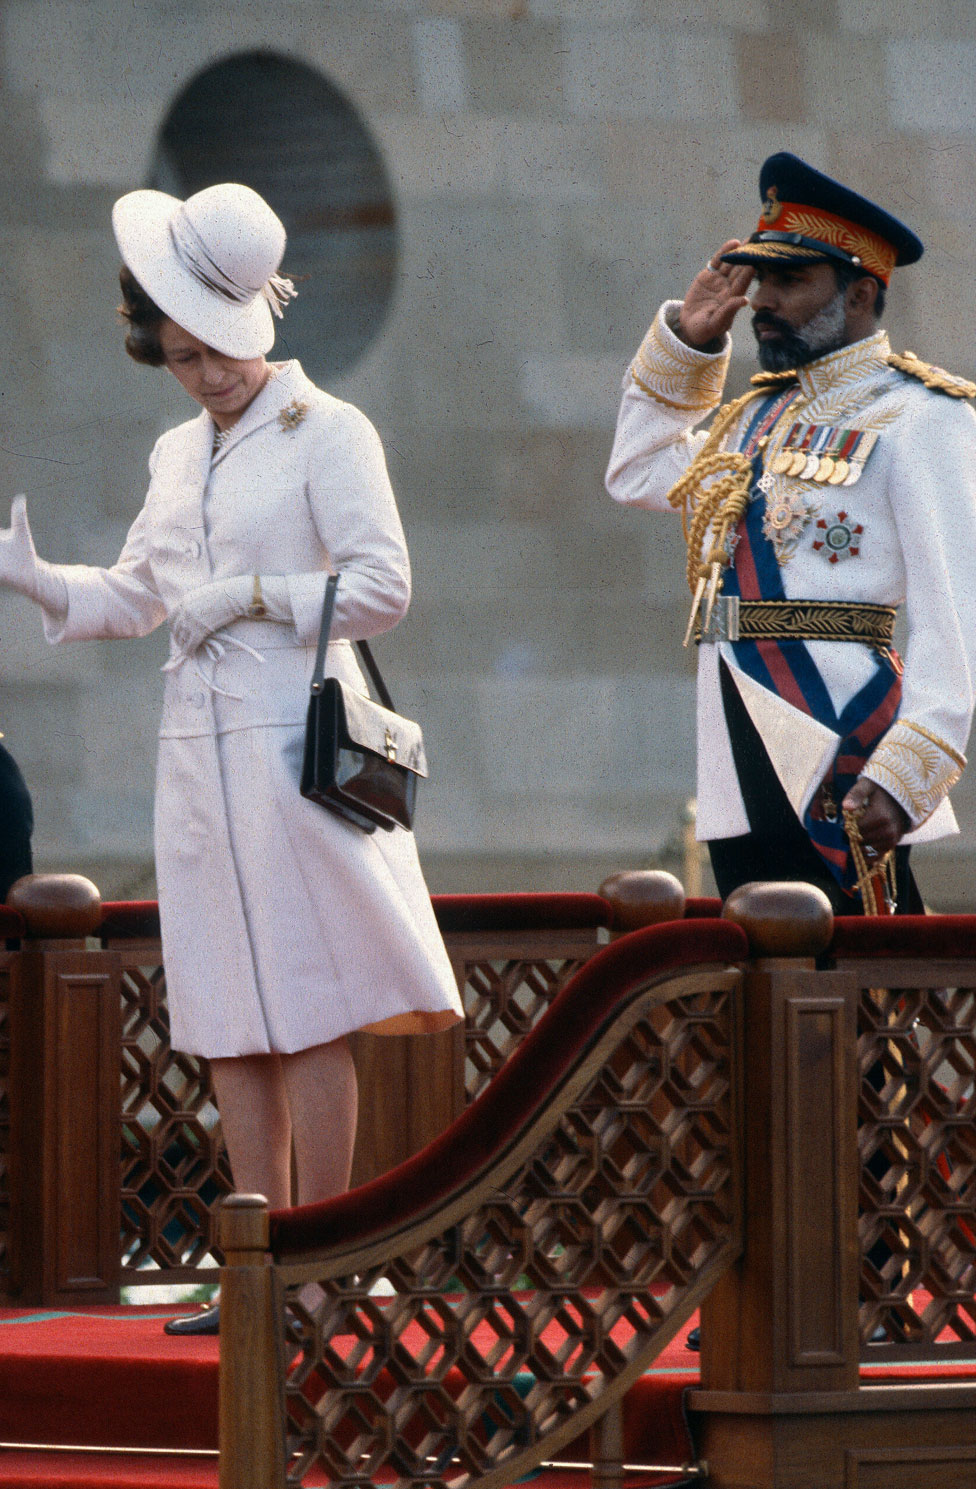 Queen Elizabeth ll nearly loses her hat in the wind as she attends a welcoming ceremony with Sultan Qaboos of Oman on 28 February 1979 in Muscat. Oman.